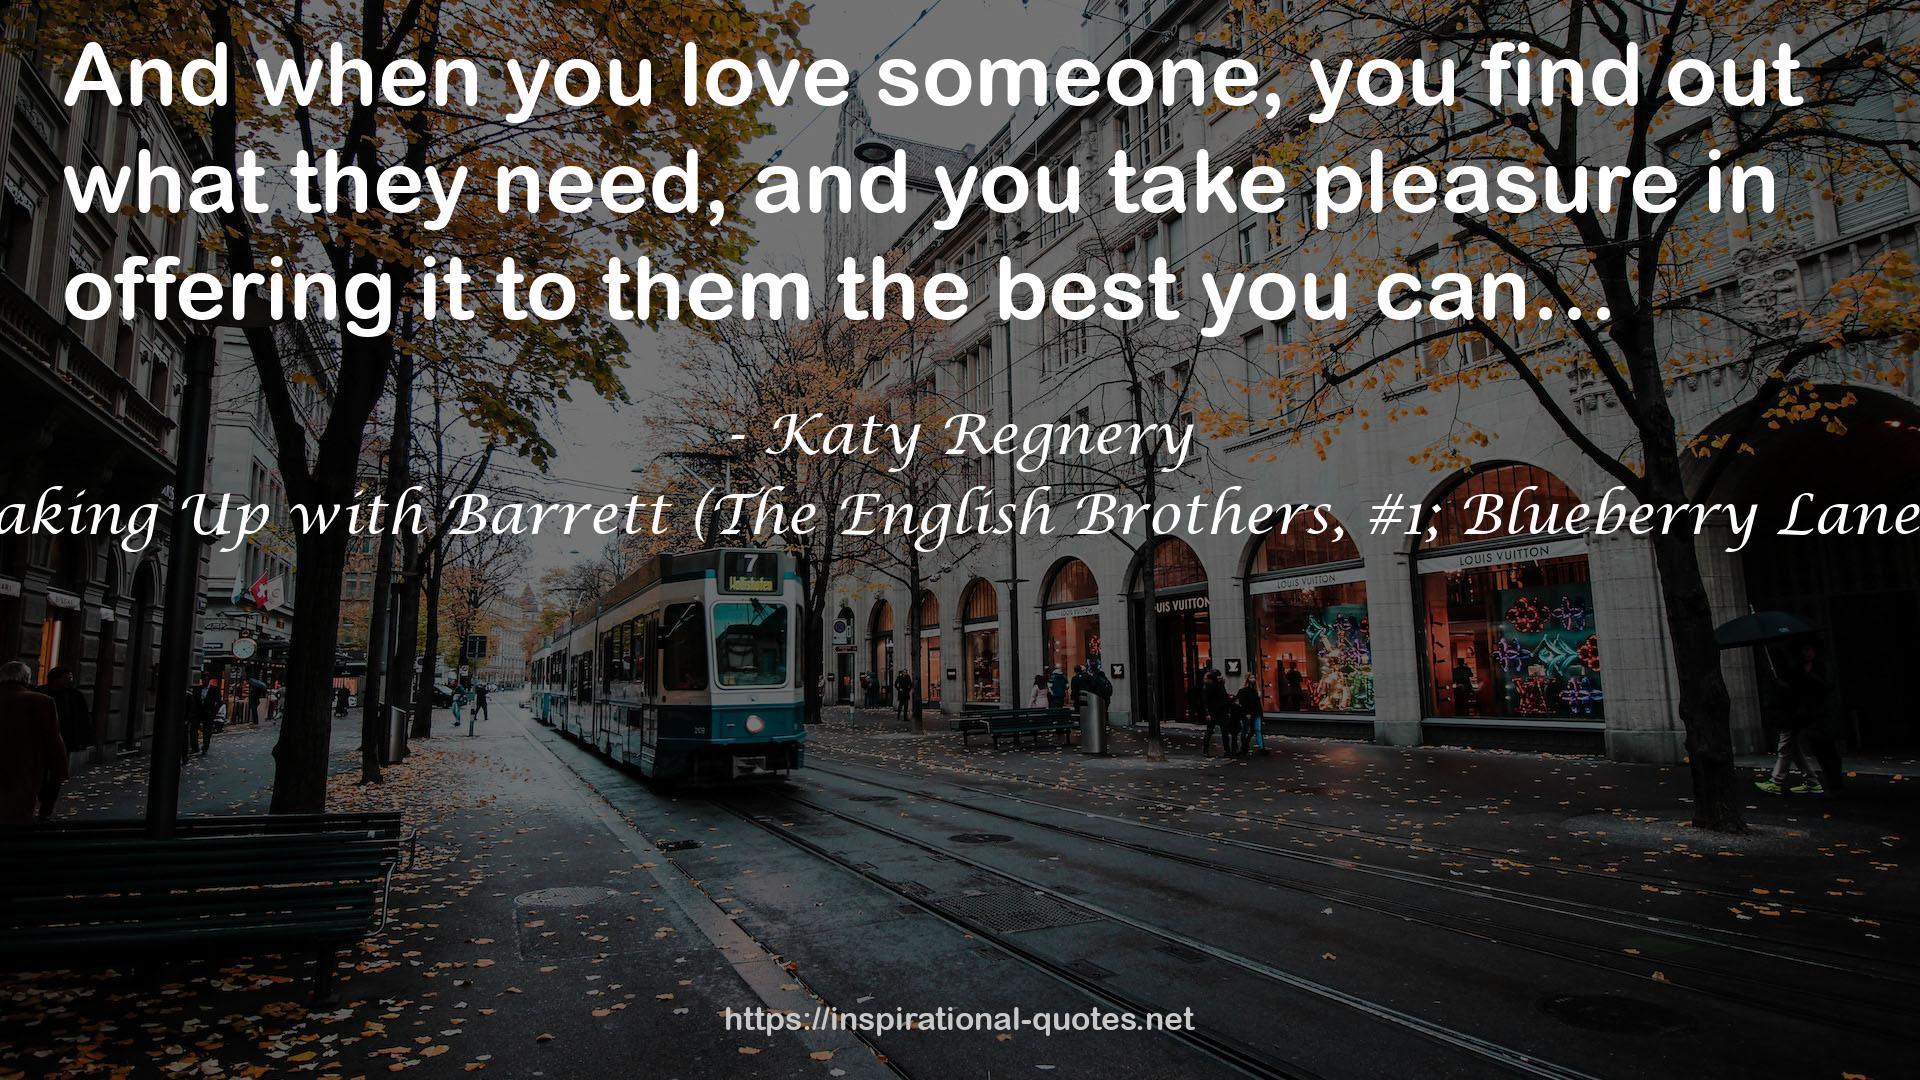 Breaking Up with Barrett (The English Brothers, #1; Blueberry Lane, #1) QUOTES